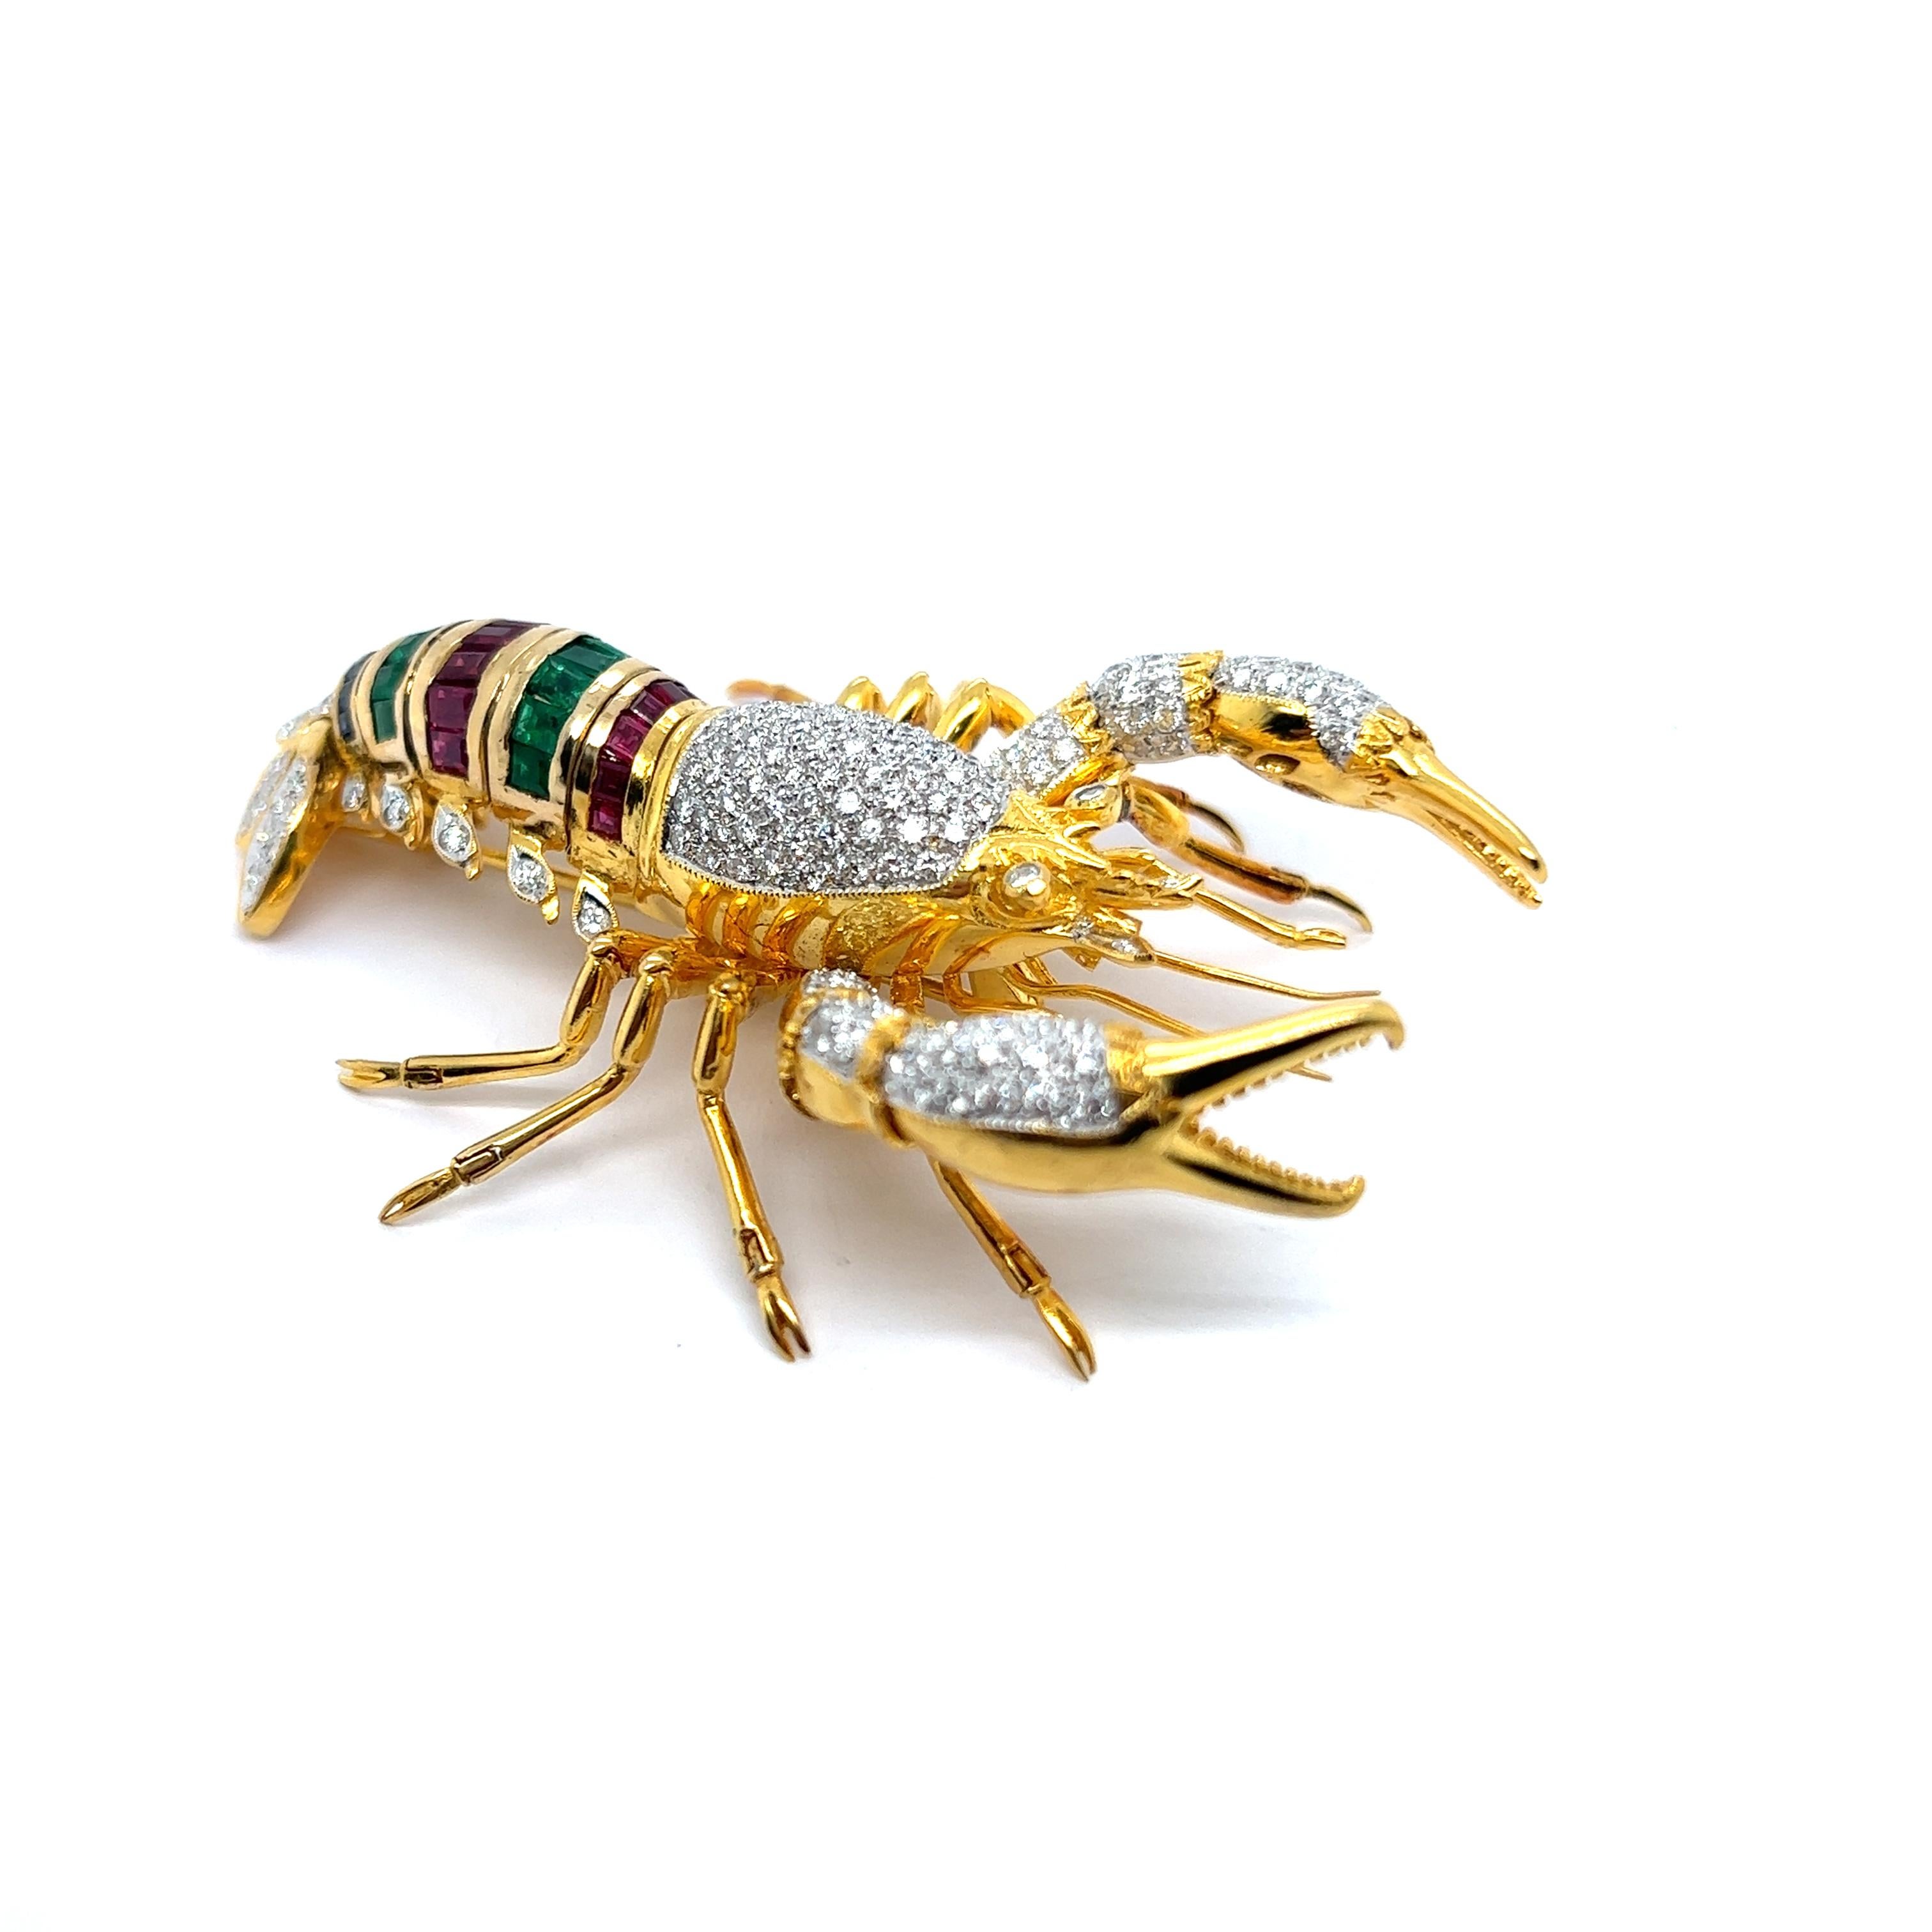 Mixed Cut Lobster Brooch with Diamonds Rubies Emeralds & Sapphires in 18 Karat Yellow Gold For Sale